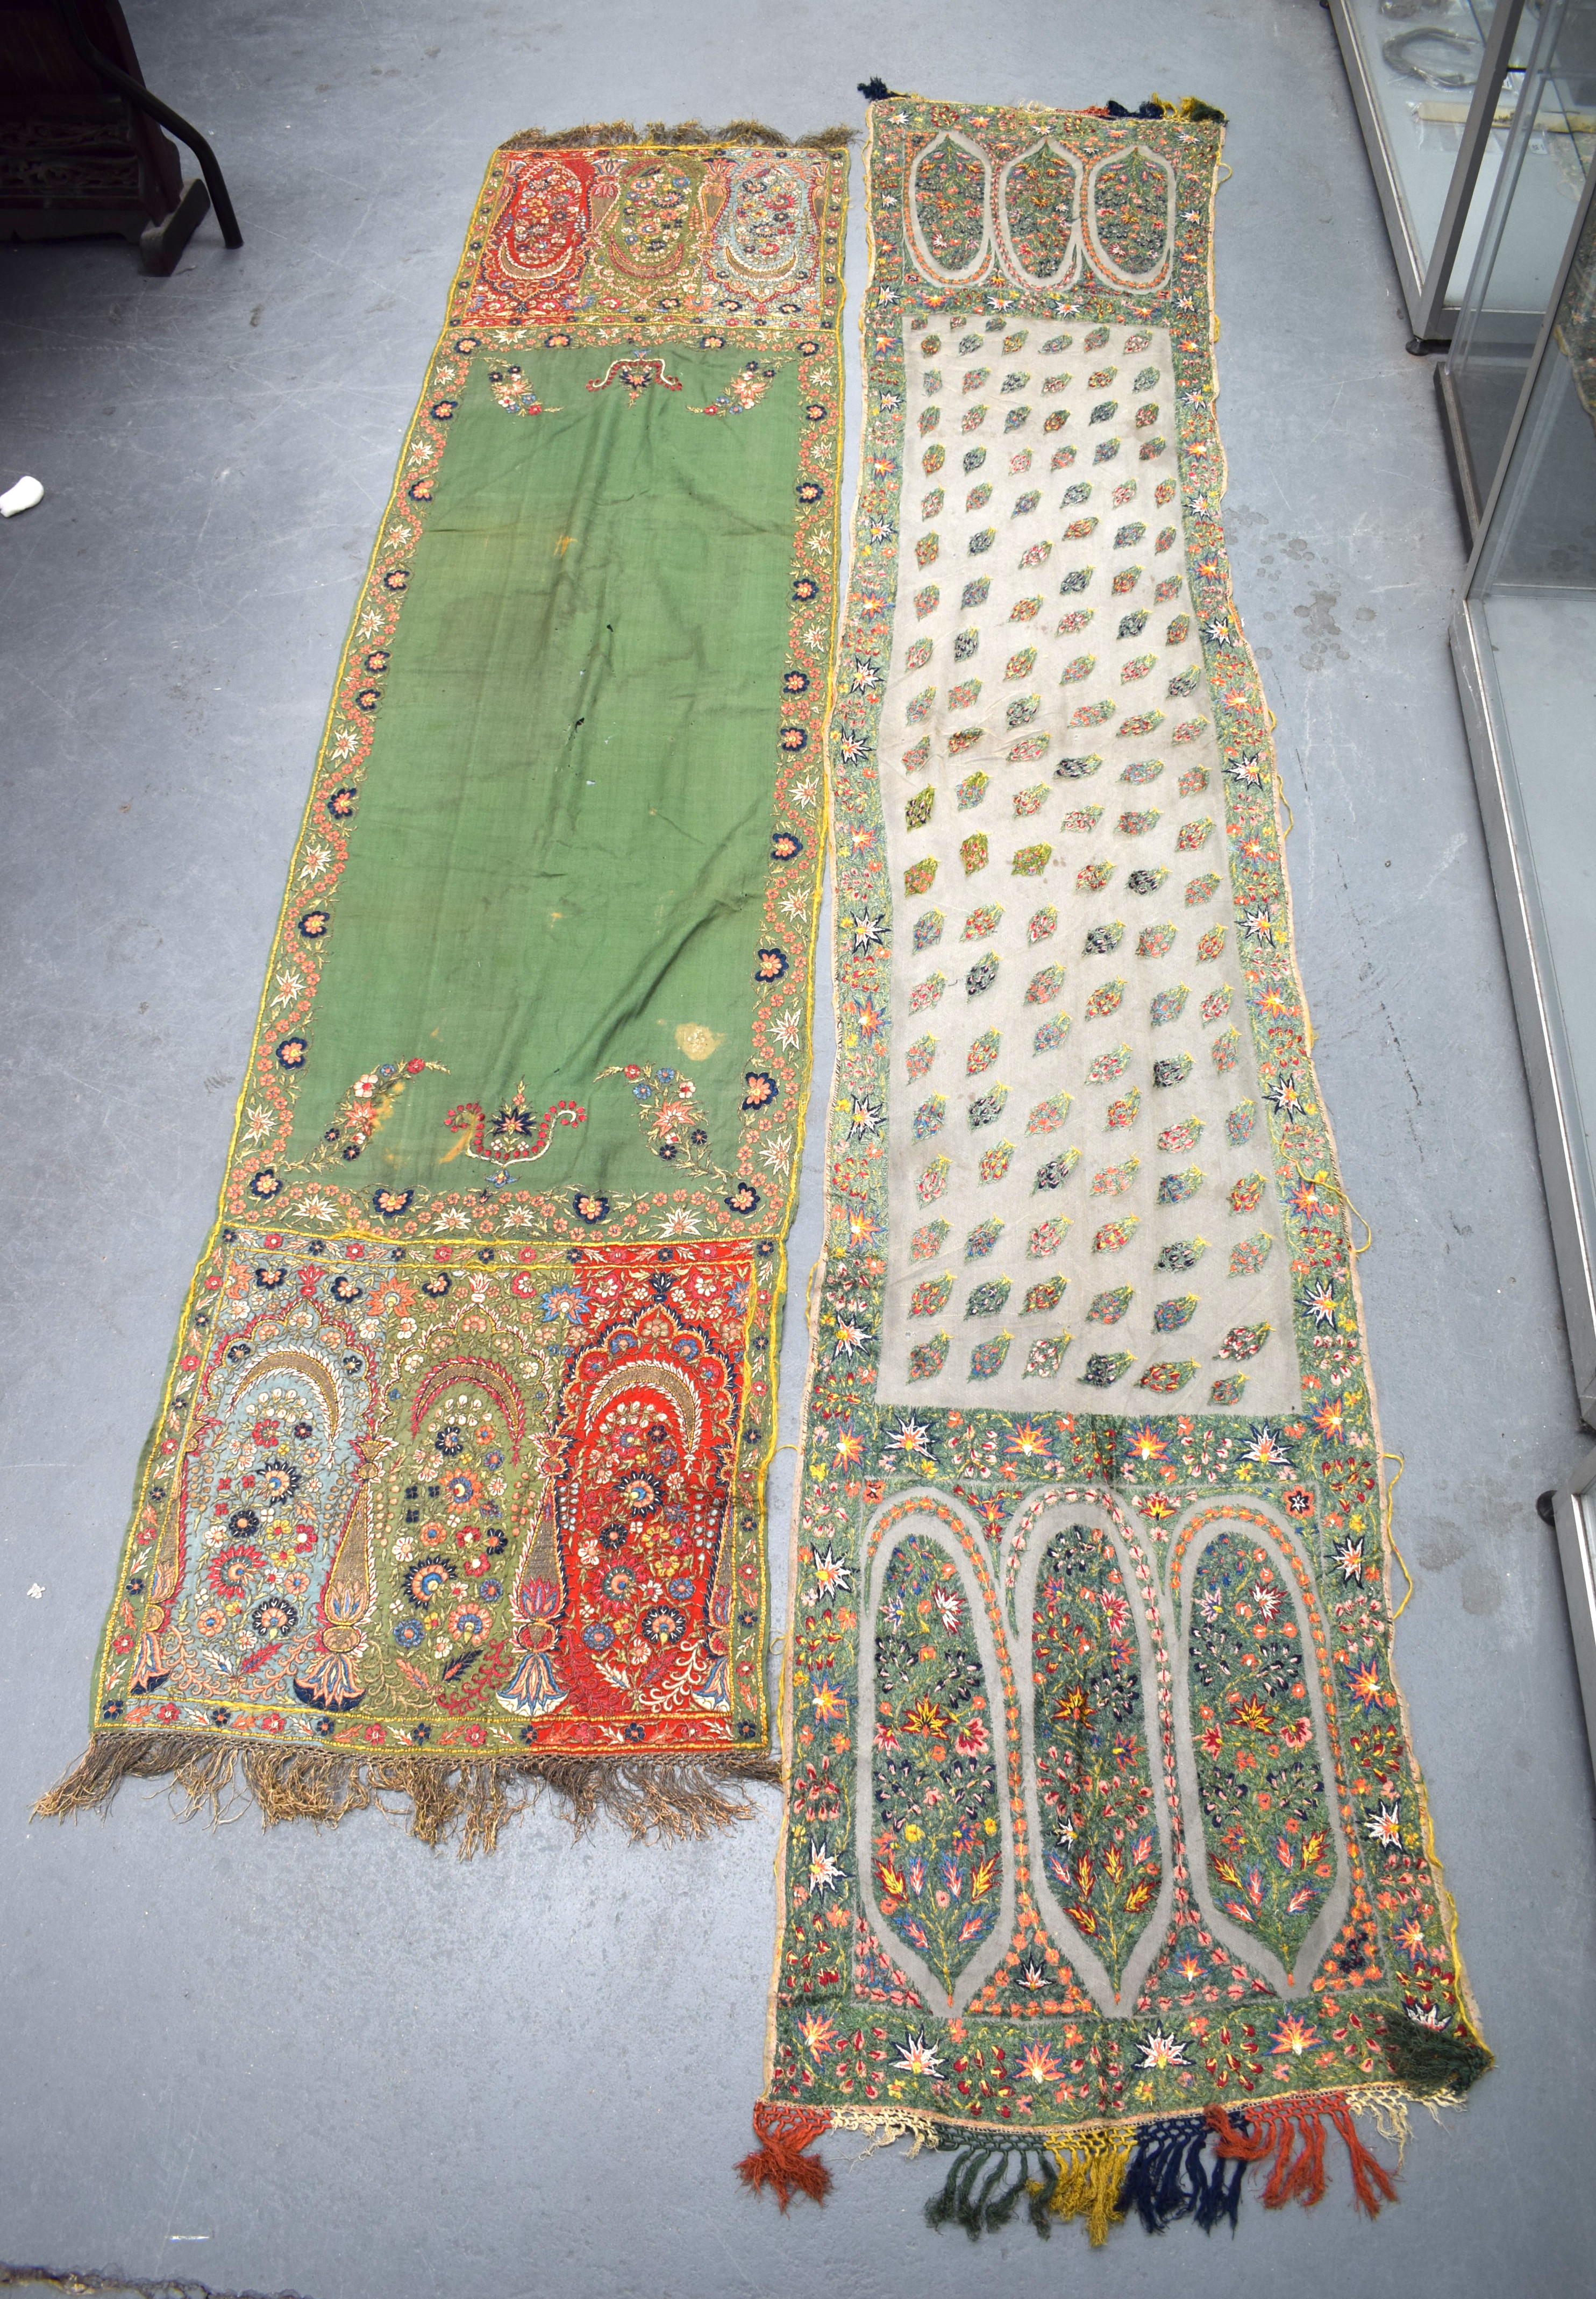 TWO 19TH CENTURY KASHMIRI SILK EMBROIDERED SHAWLS decorated with foliage. (2)